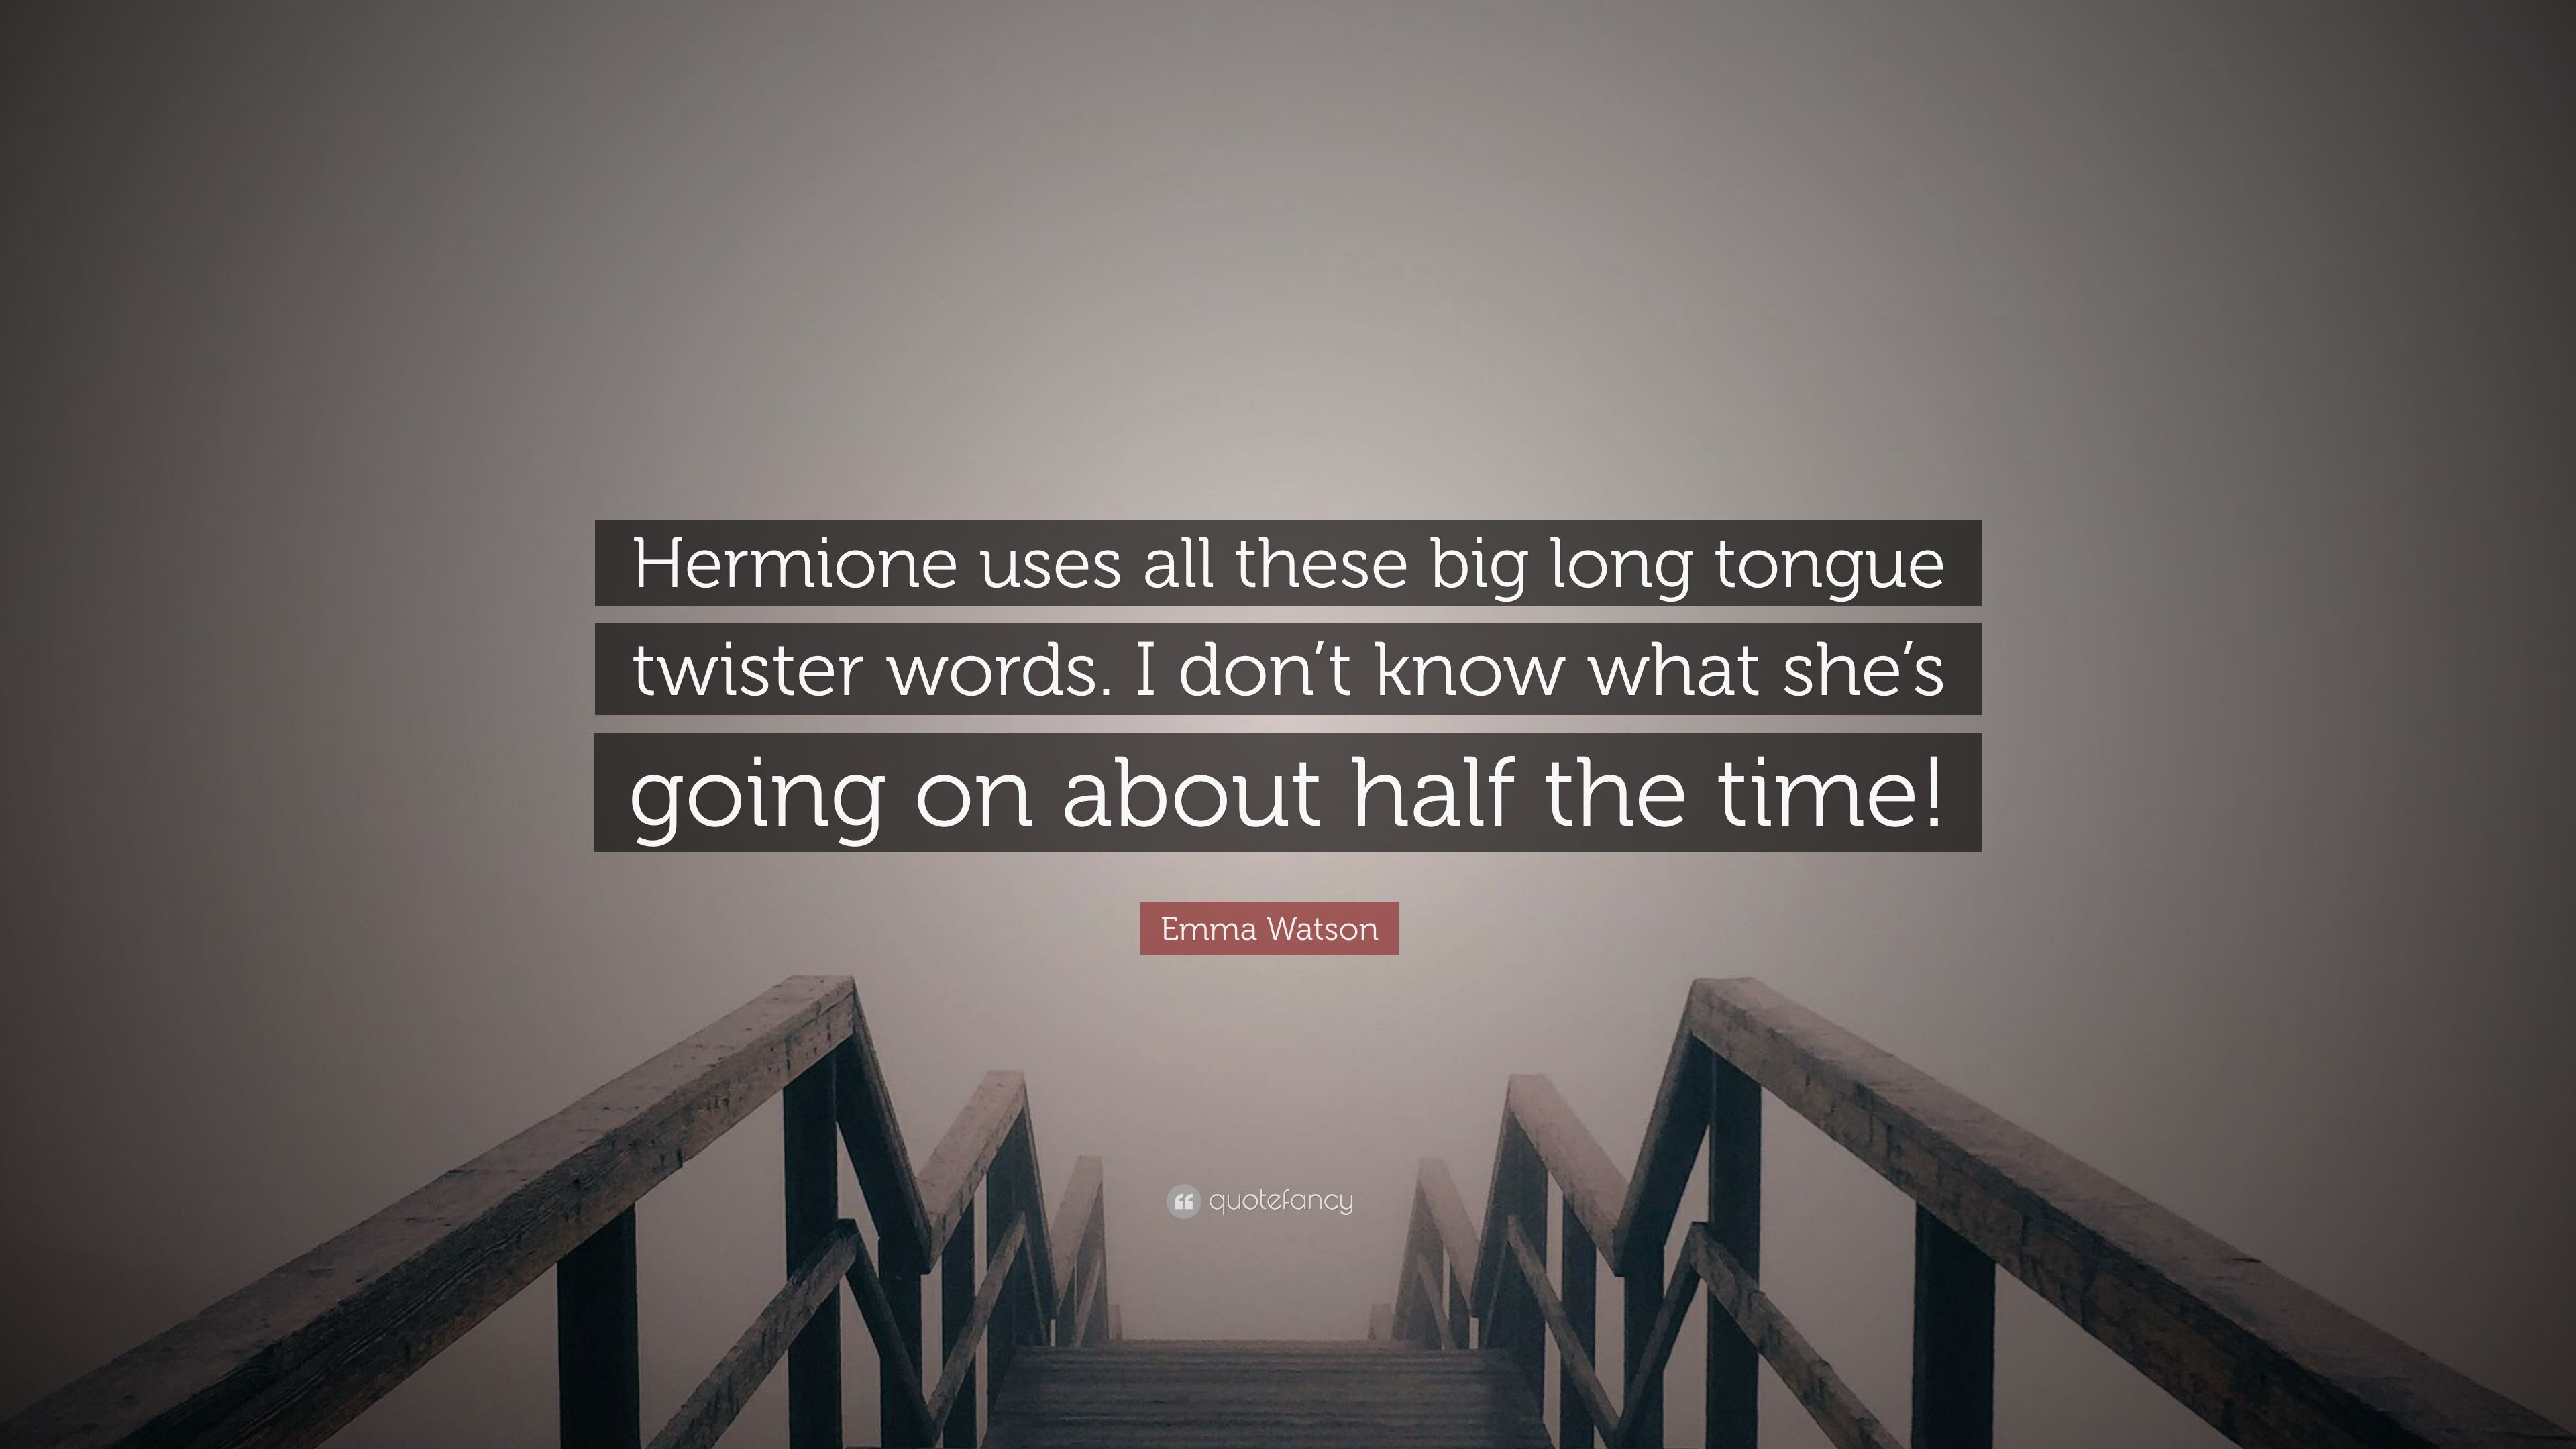 Emma Watson Quote: “Hermione uses all these big long tongue